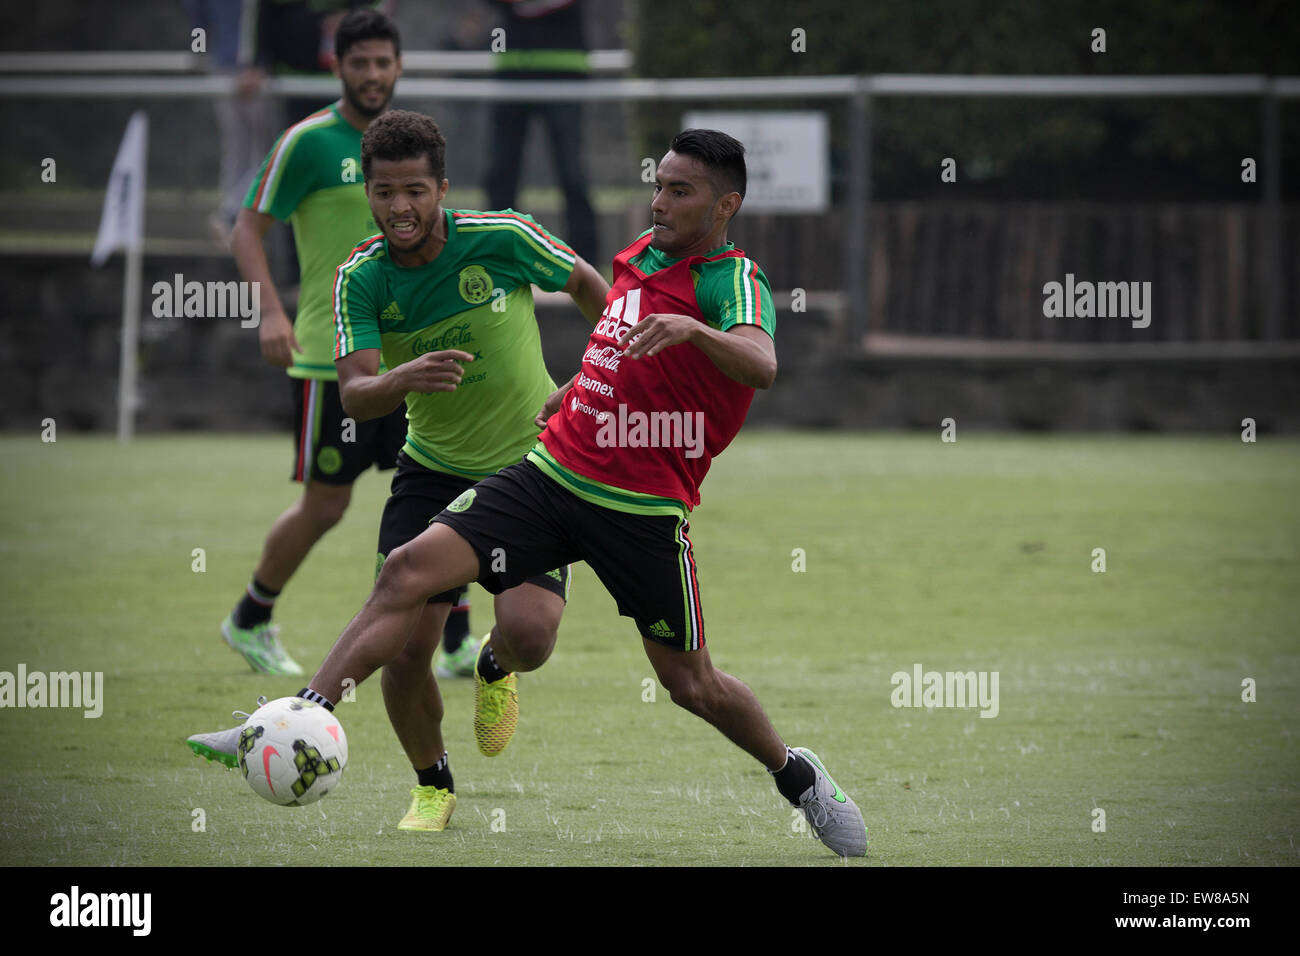 Mexico City, Mexico. 19th June, 2015. Mexico's national football team players Giovani dos Santos (L Front) and Jose Vazquez (R) take part in a training session prior to the 2015 CONCACAF Gold Cup, in Mexico City, capital of Mexico, on June 19, 2015. The 2015 Gold Cup will be held in the United States and Canada on July 7-26, 2015. Credit:  Alejandro Ayala/Xinhua/Alamy Live News Stock Photo